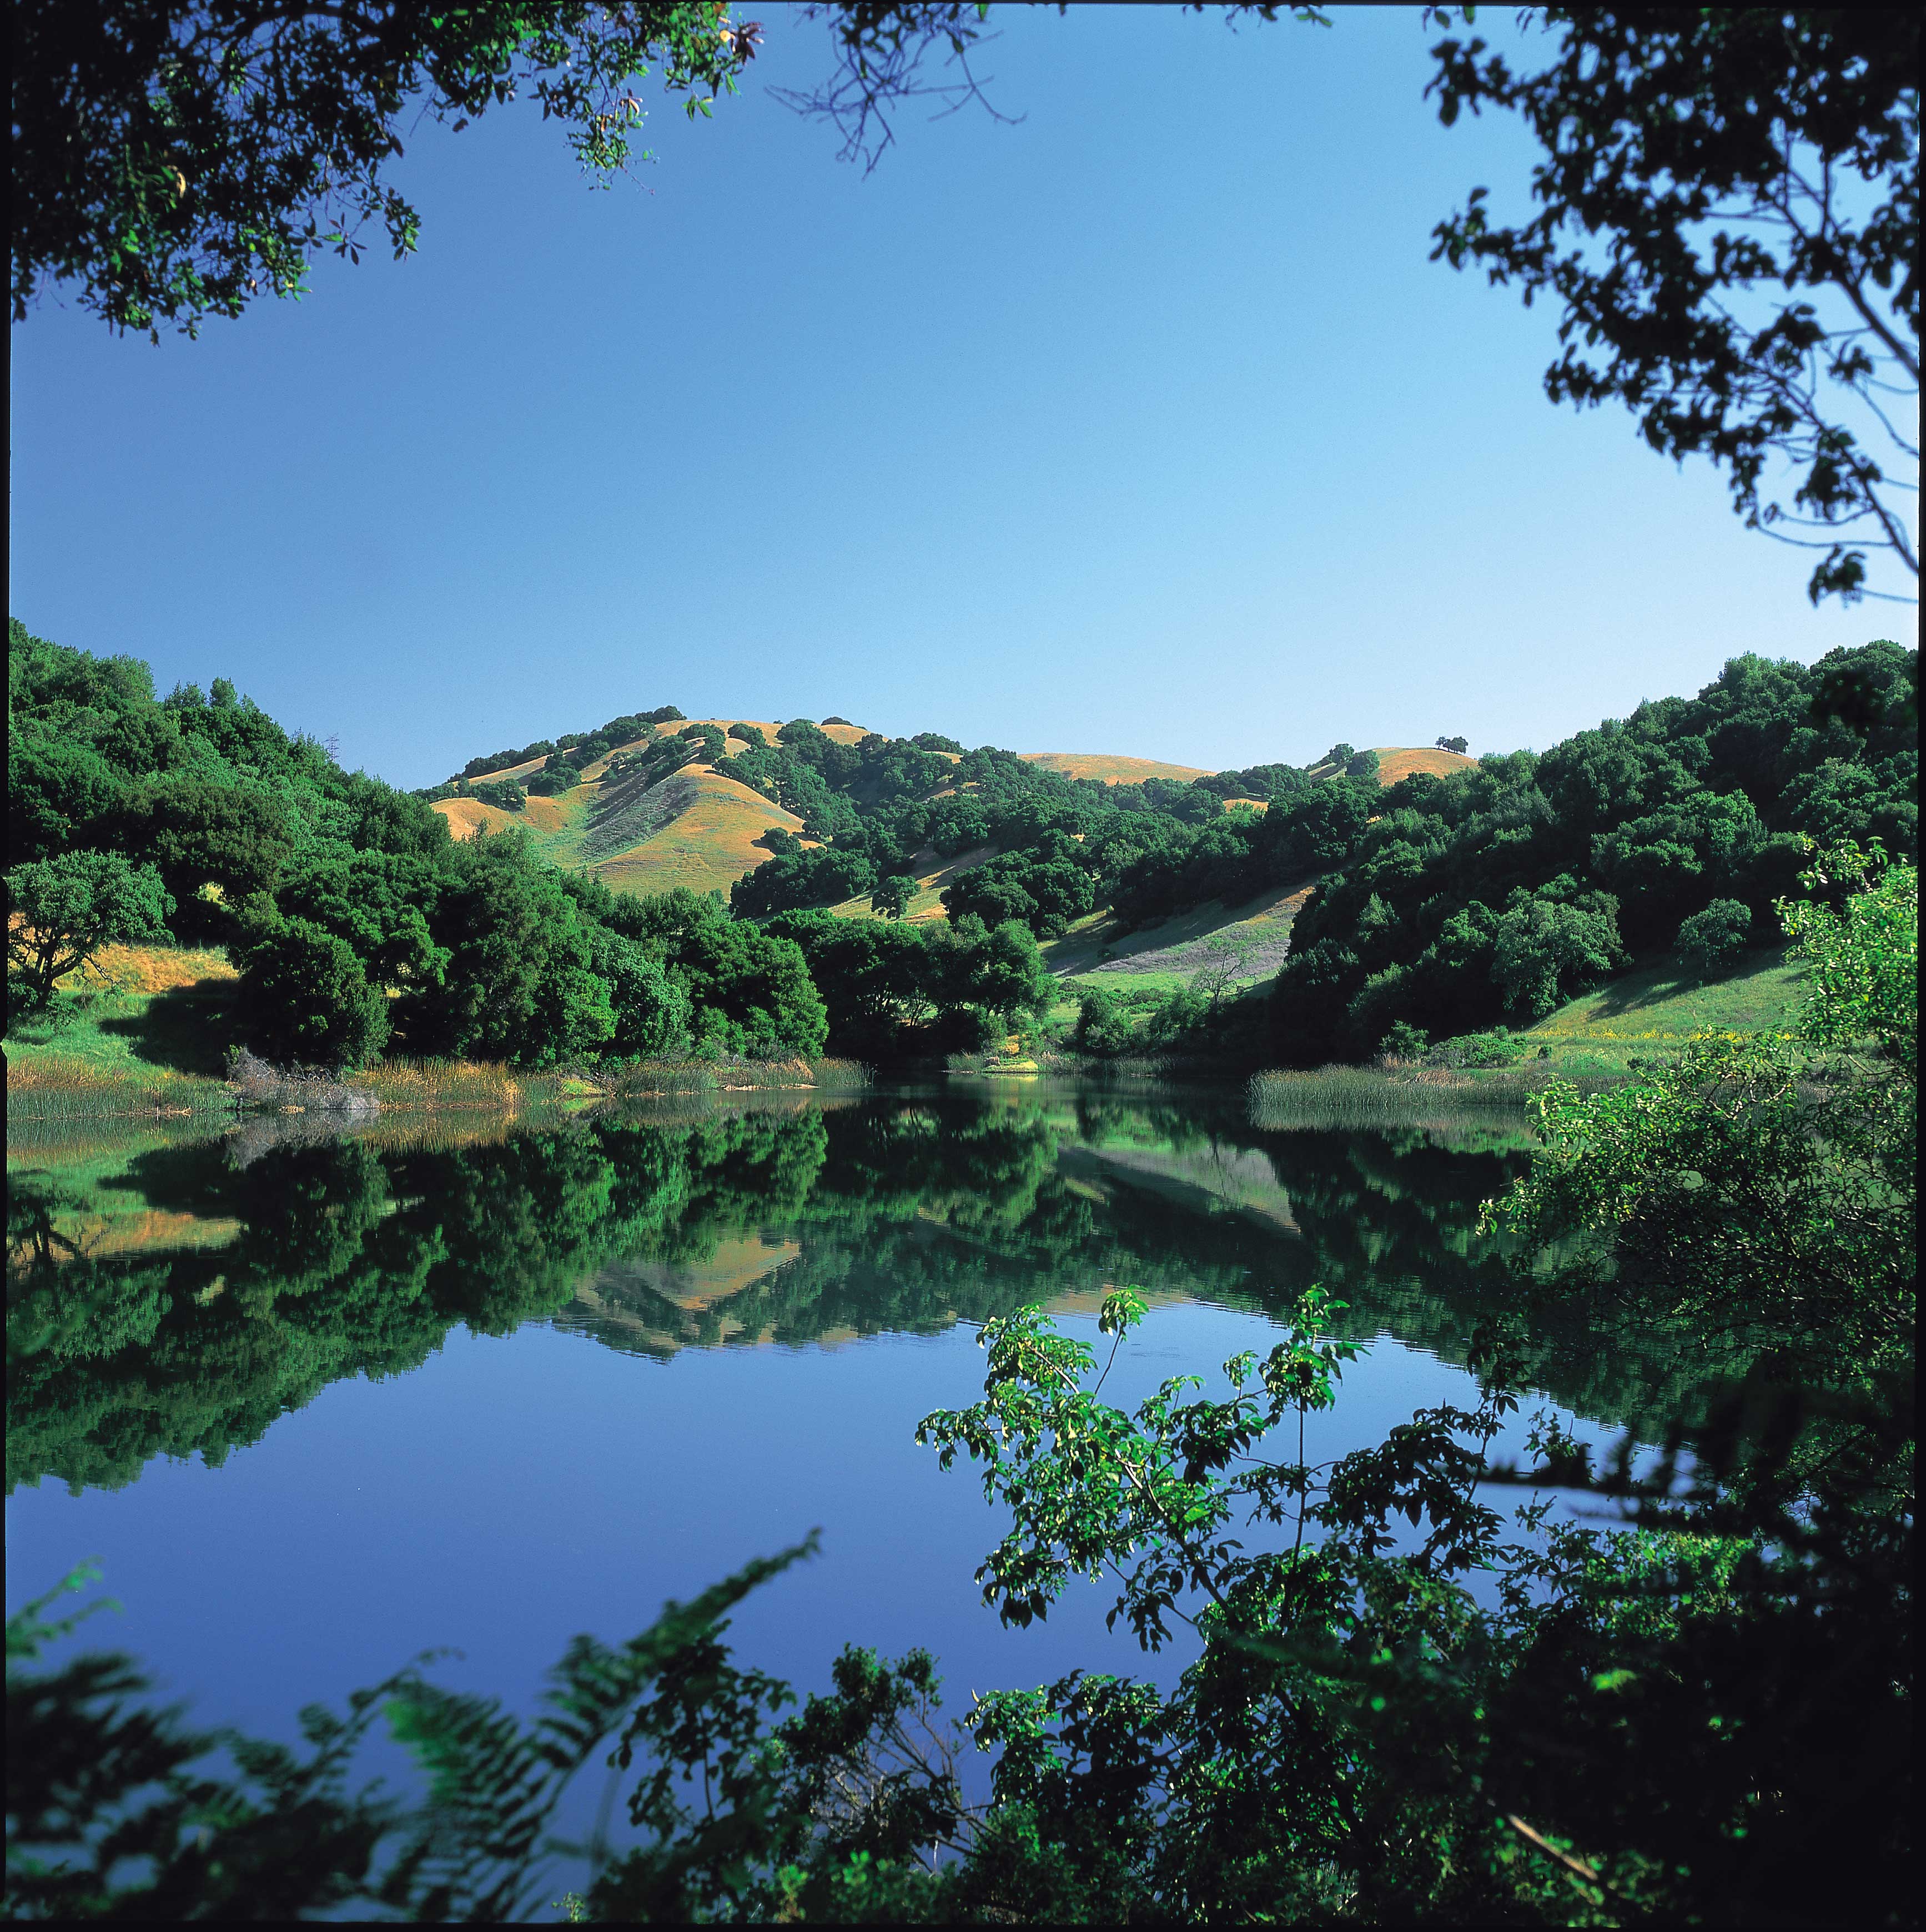 Briones Reservoir covers 725 acres in Contra Costa County and is owned and operated by EBMUD for raw water storage.